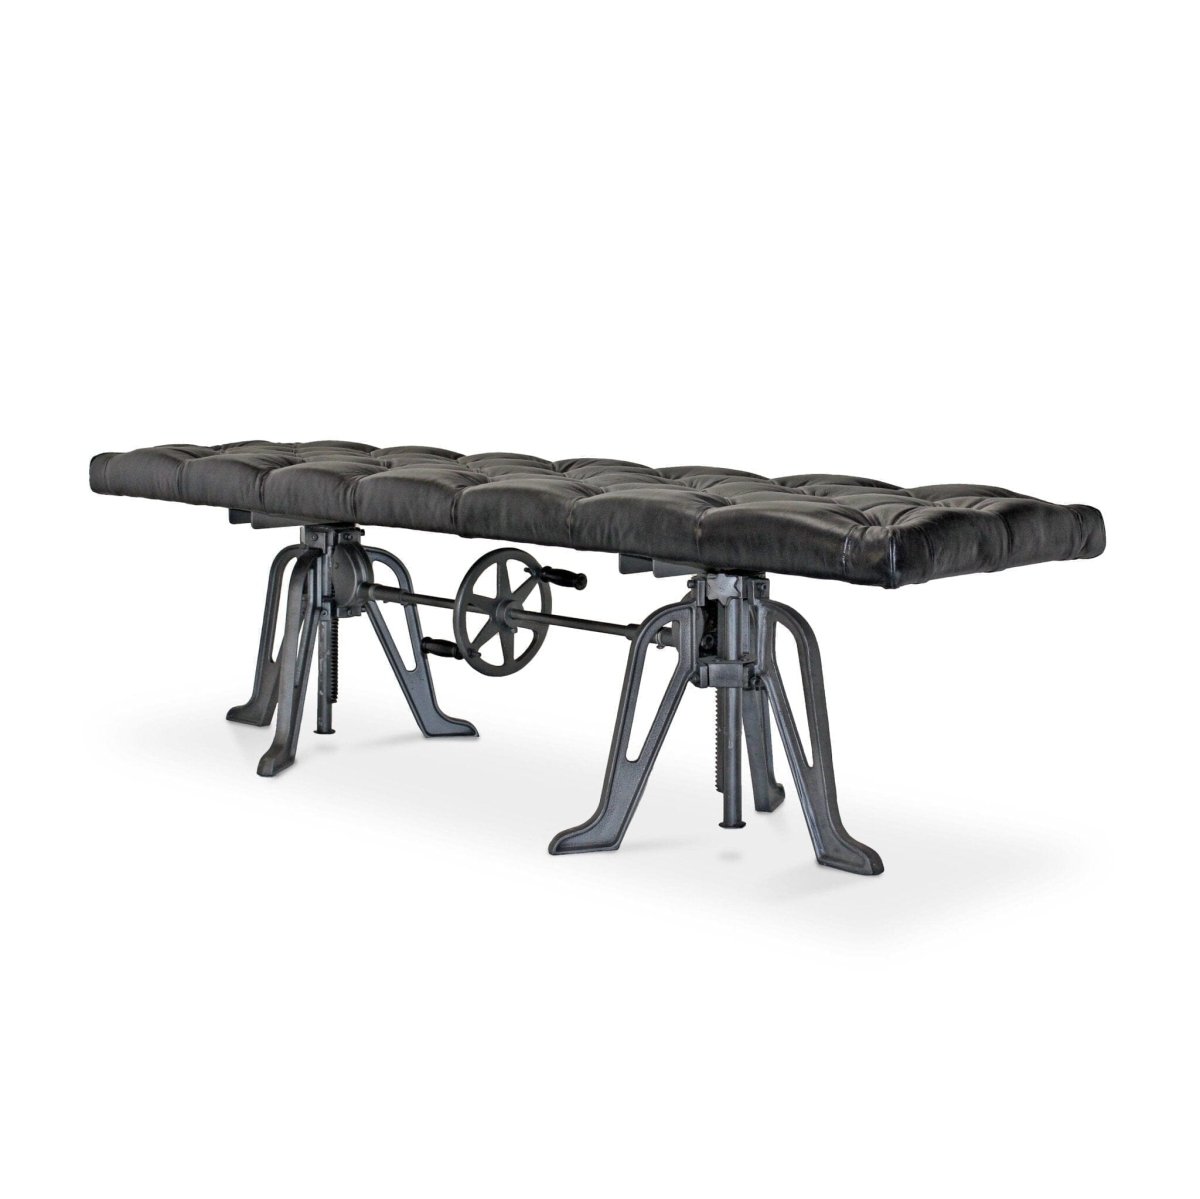 Adjustable Industrial Dining Bench - Cast Iron - Black Tufted Leather - 70